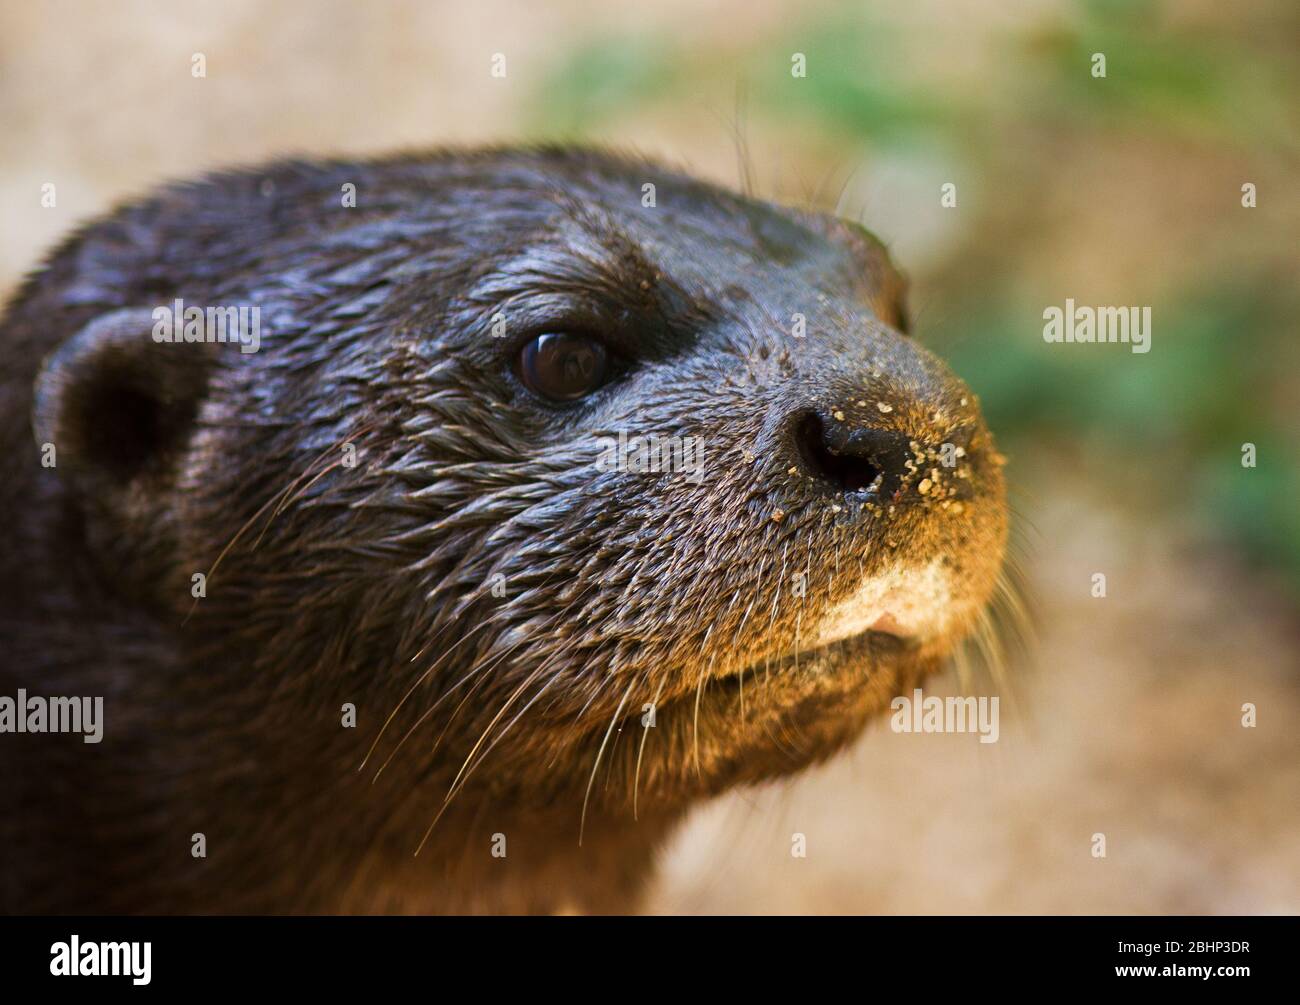 A Spotted-necked Otter peers out from the entrance from its holt. Though they were widespread these agile aquatic hunters have been persecuted Stock Photo